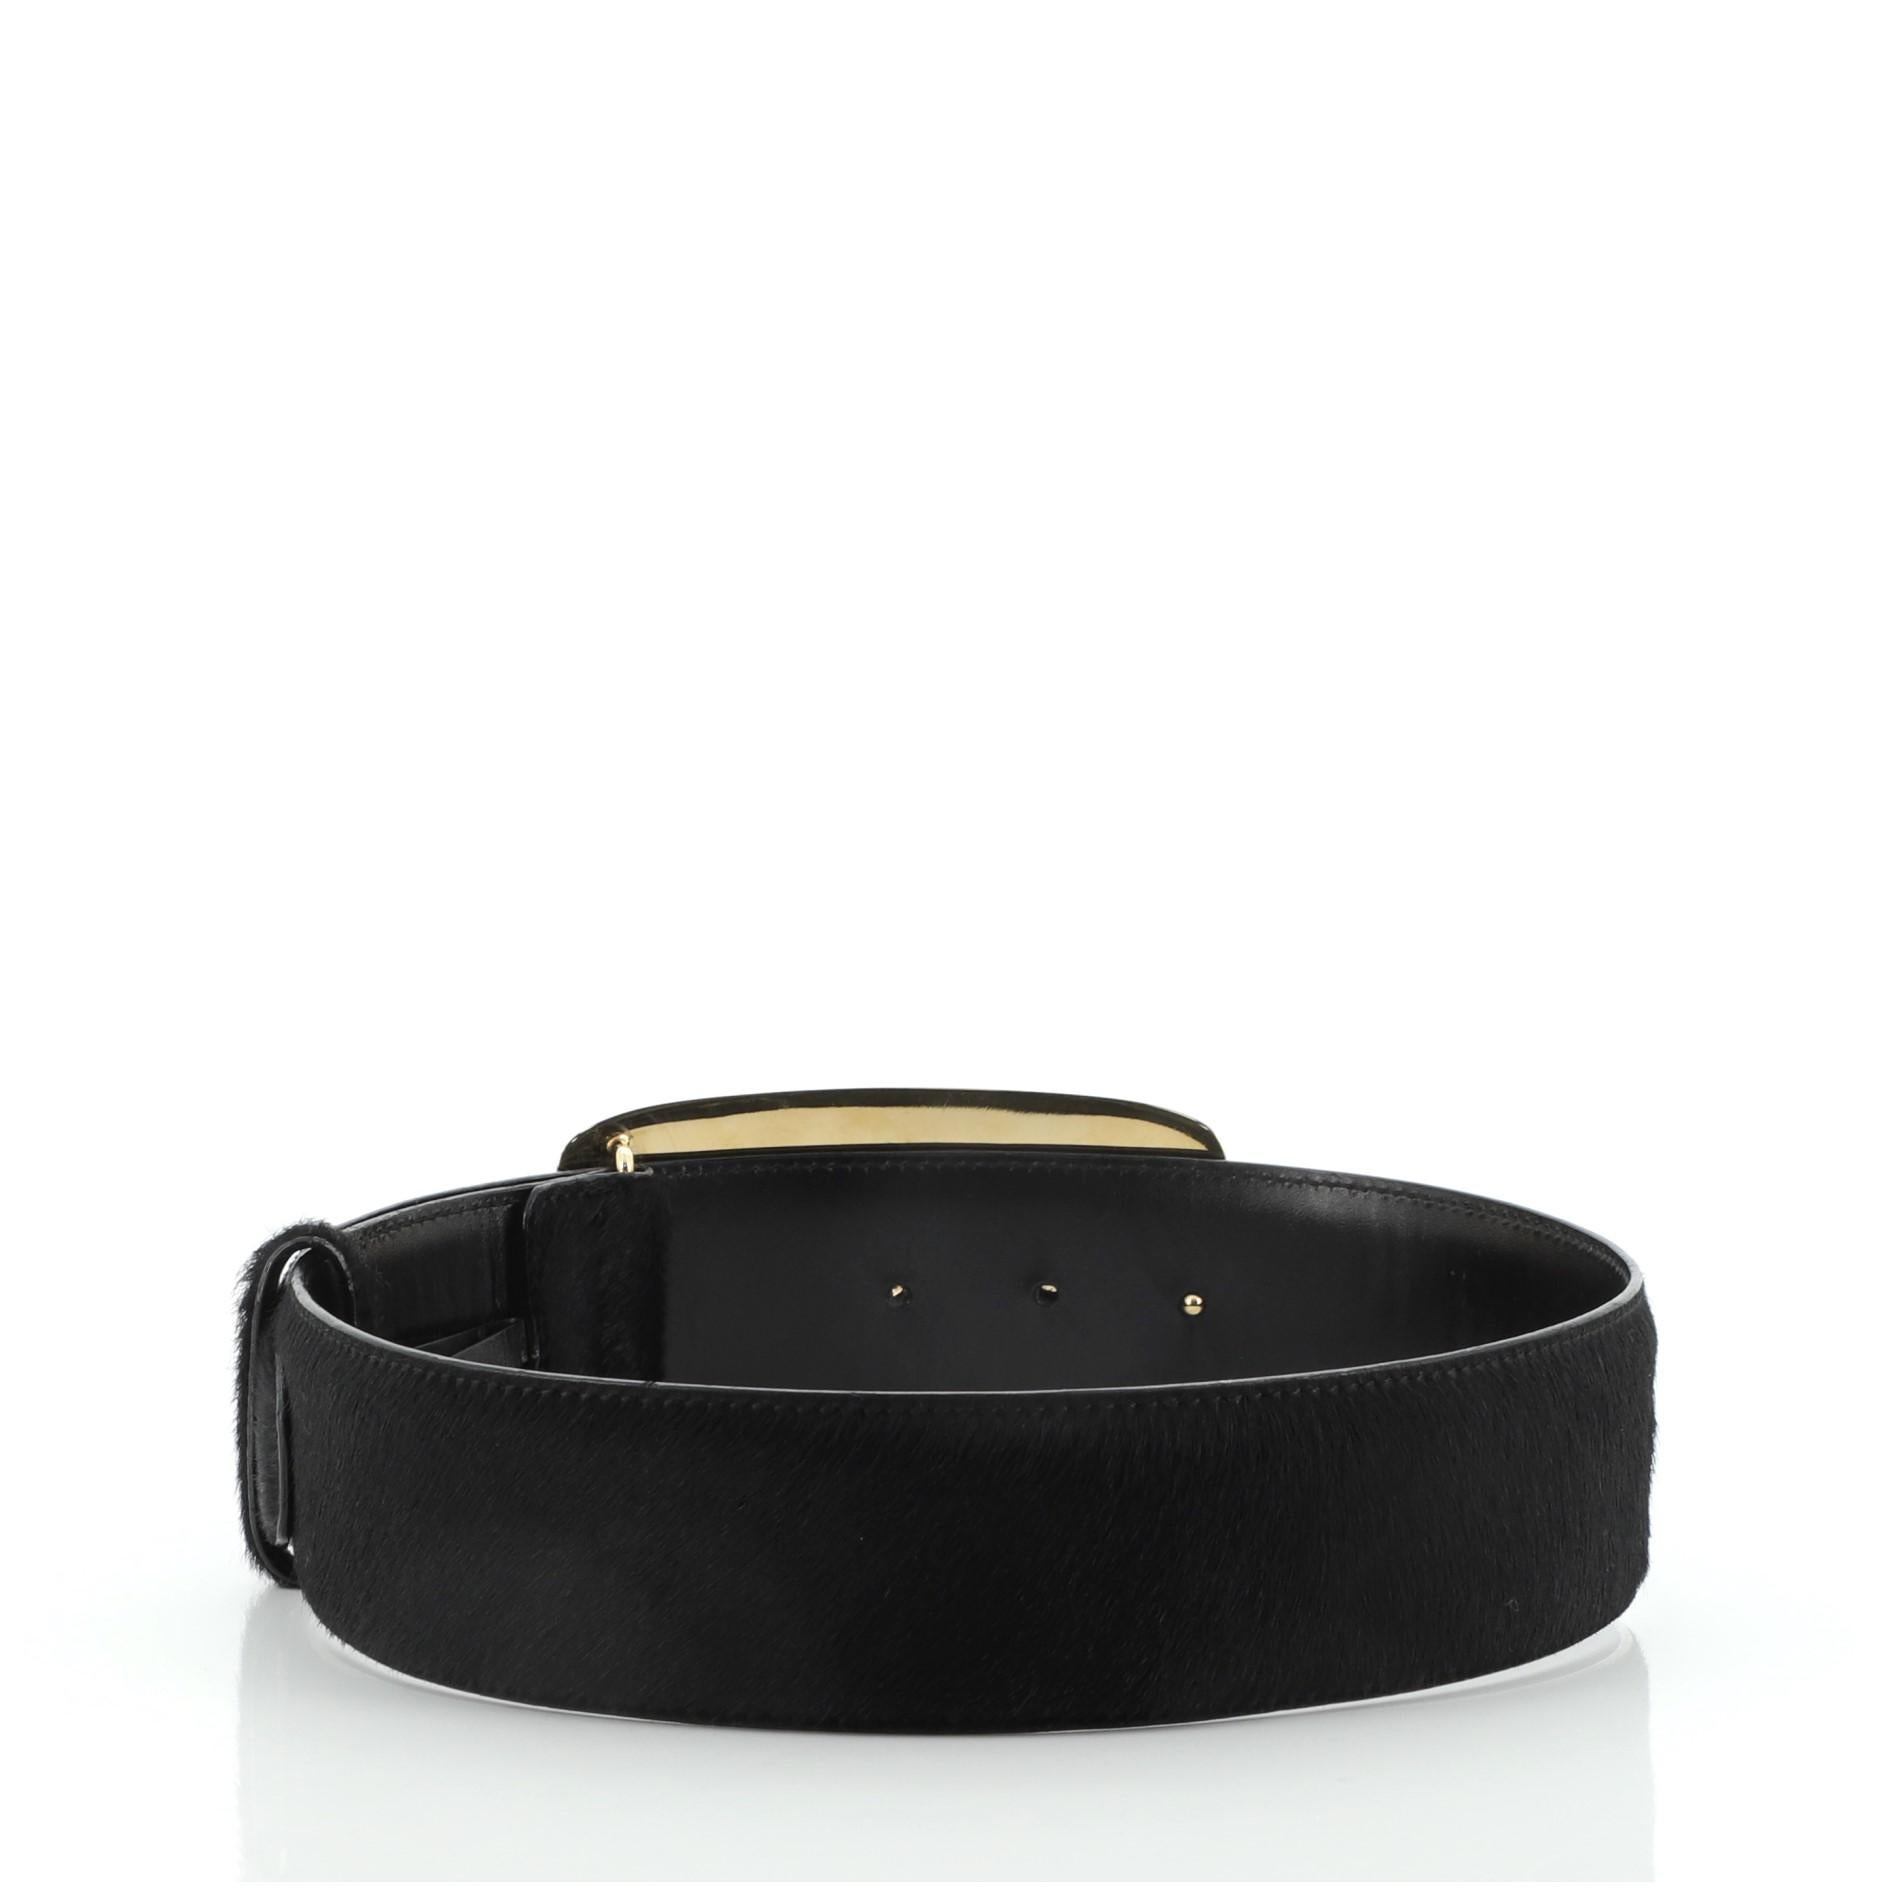 Gucci Abstract G Buckle Belt Pony Hair Wide
Black Pony HAir

Condition Details: Wear and scuffs on interior, scratches on hardware.

50609MSC

Height None